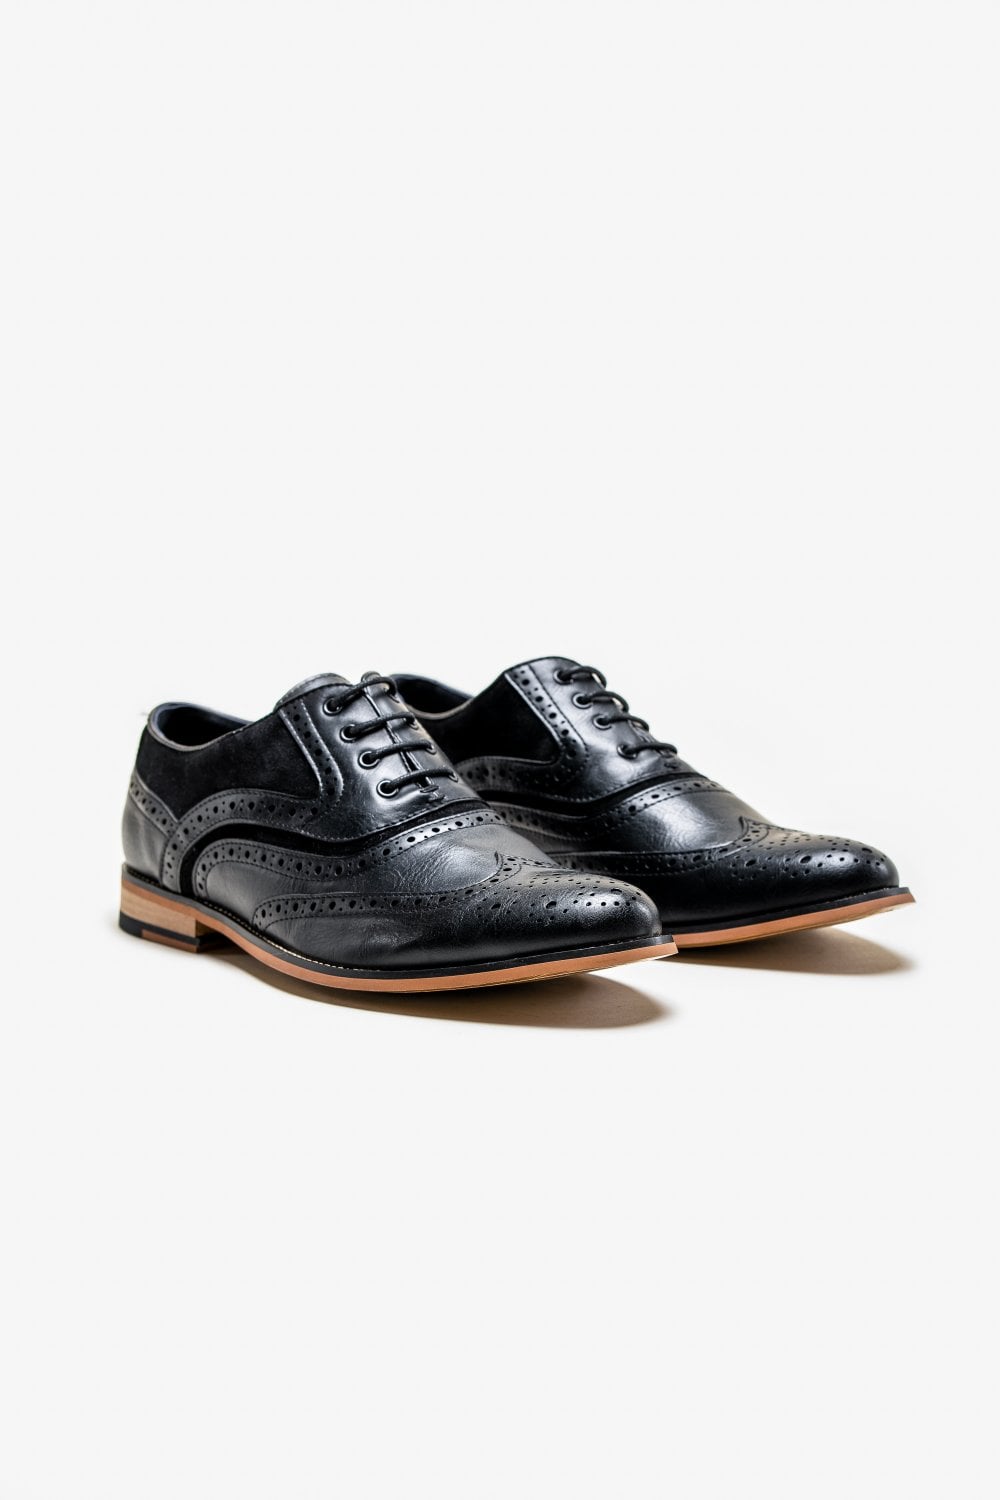 HOUSE OF CAVANI Russell Brogue Shoes